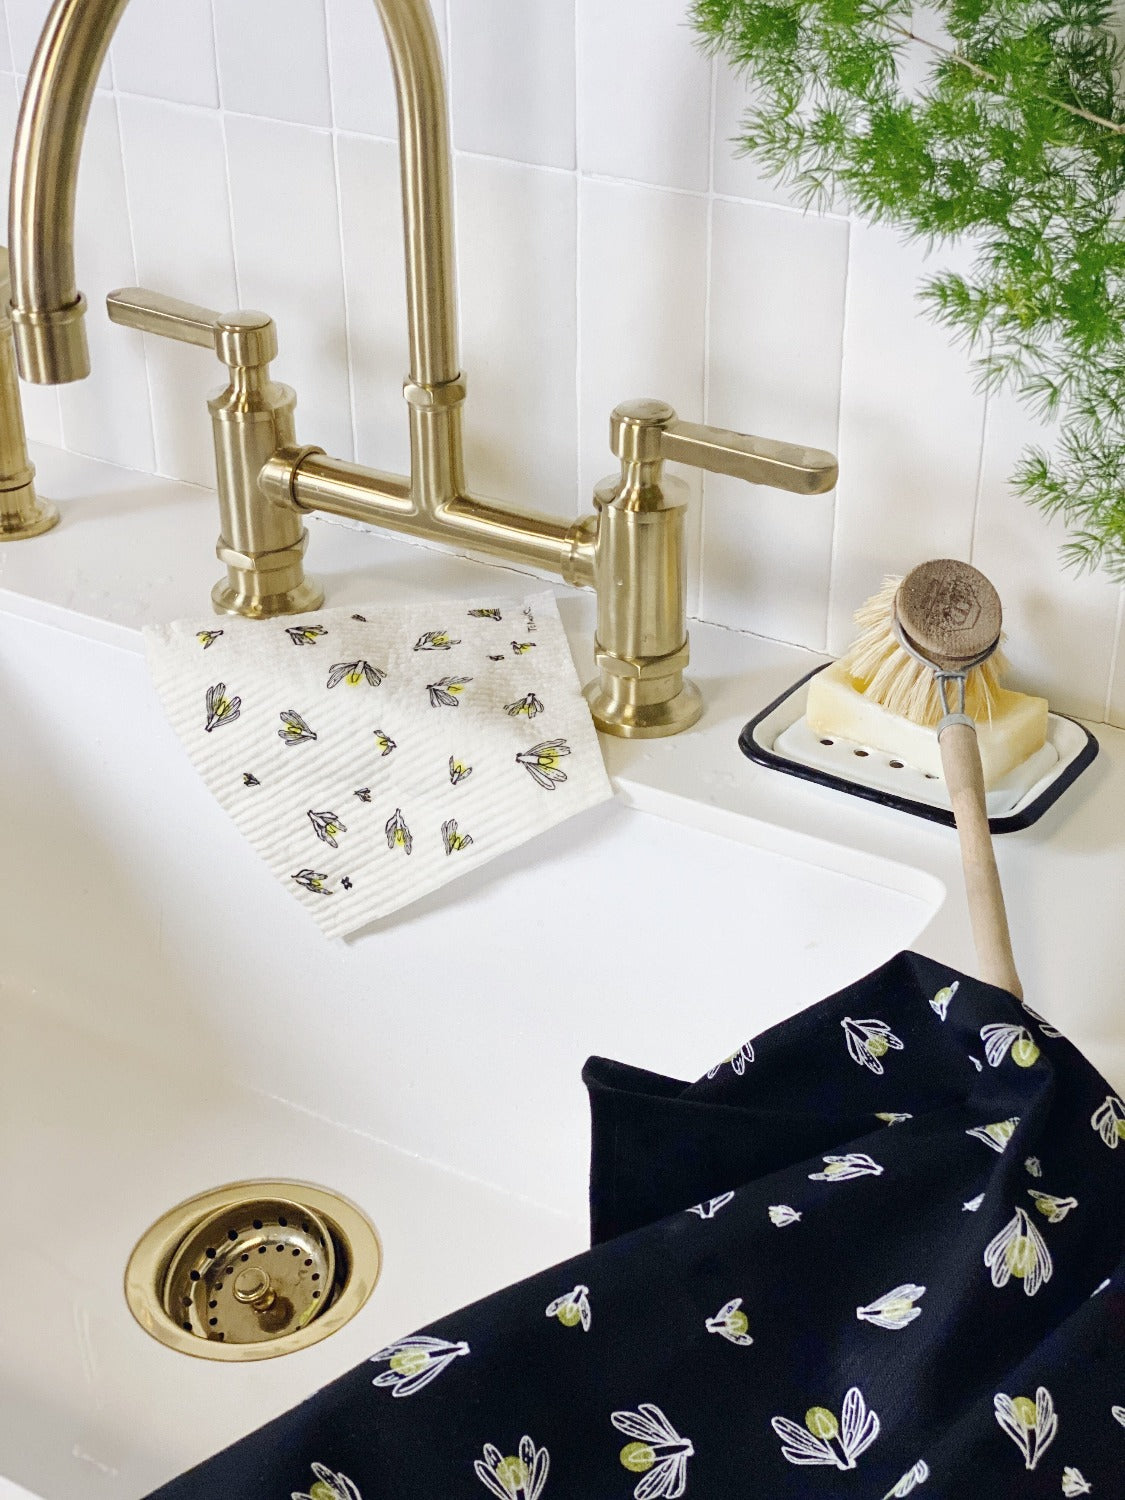 Product image of Firefly gift set on a black background. In this image there is a white kitchen sink with brass fixtures. There is a Firefly sponge cloth laying over the edge of the sink near the faucet. Beside the faucet is an enamel soap dish with a bar of soap and a dish brush. On the side edge is the black firefly tea towel. There is a small green plant in the top right corner.  